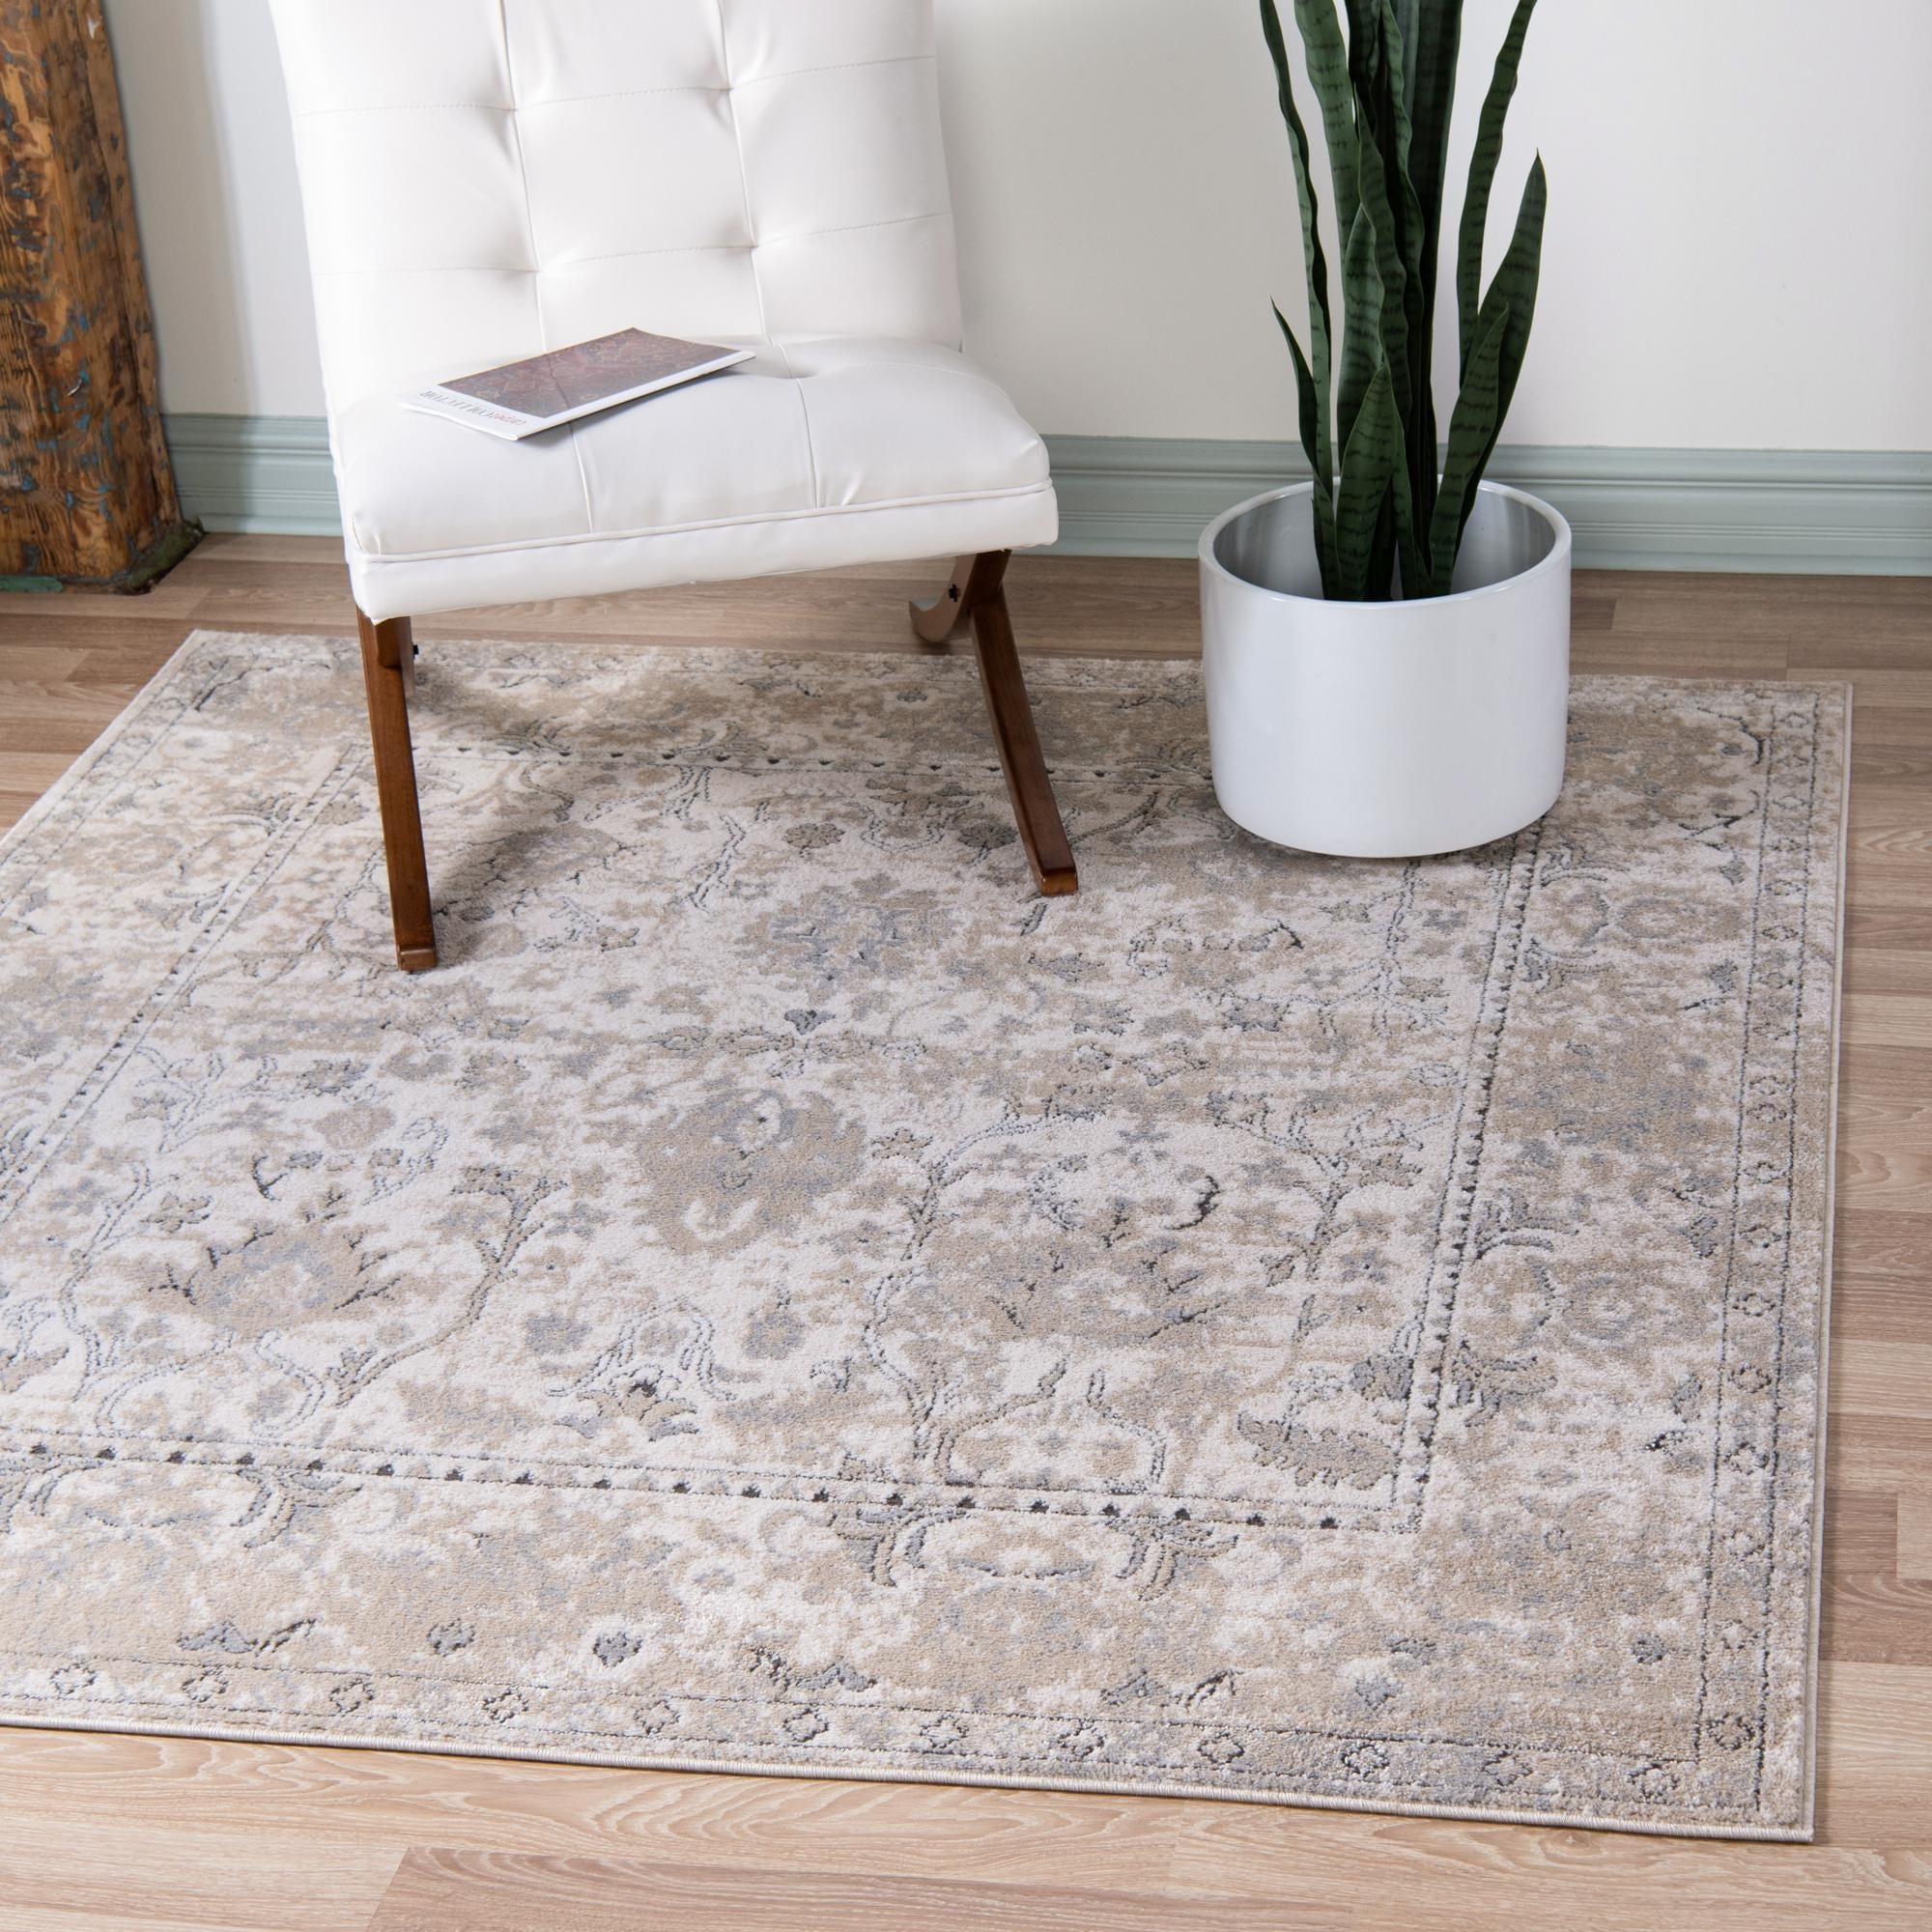 4 Ft Square Ivory Low-Pile Rug Perfect for Living Rooms Kitchens Rugs.com Oregon Collection Rug Entryways